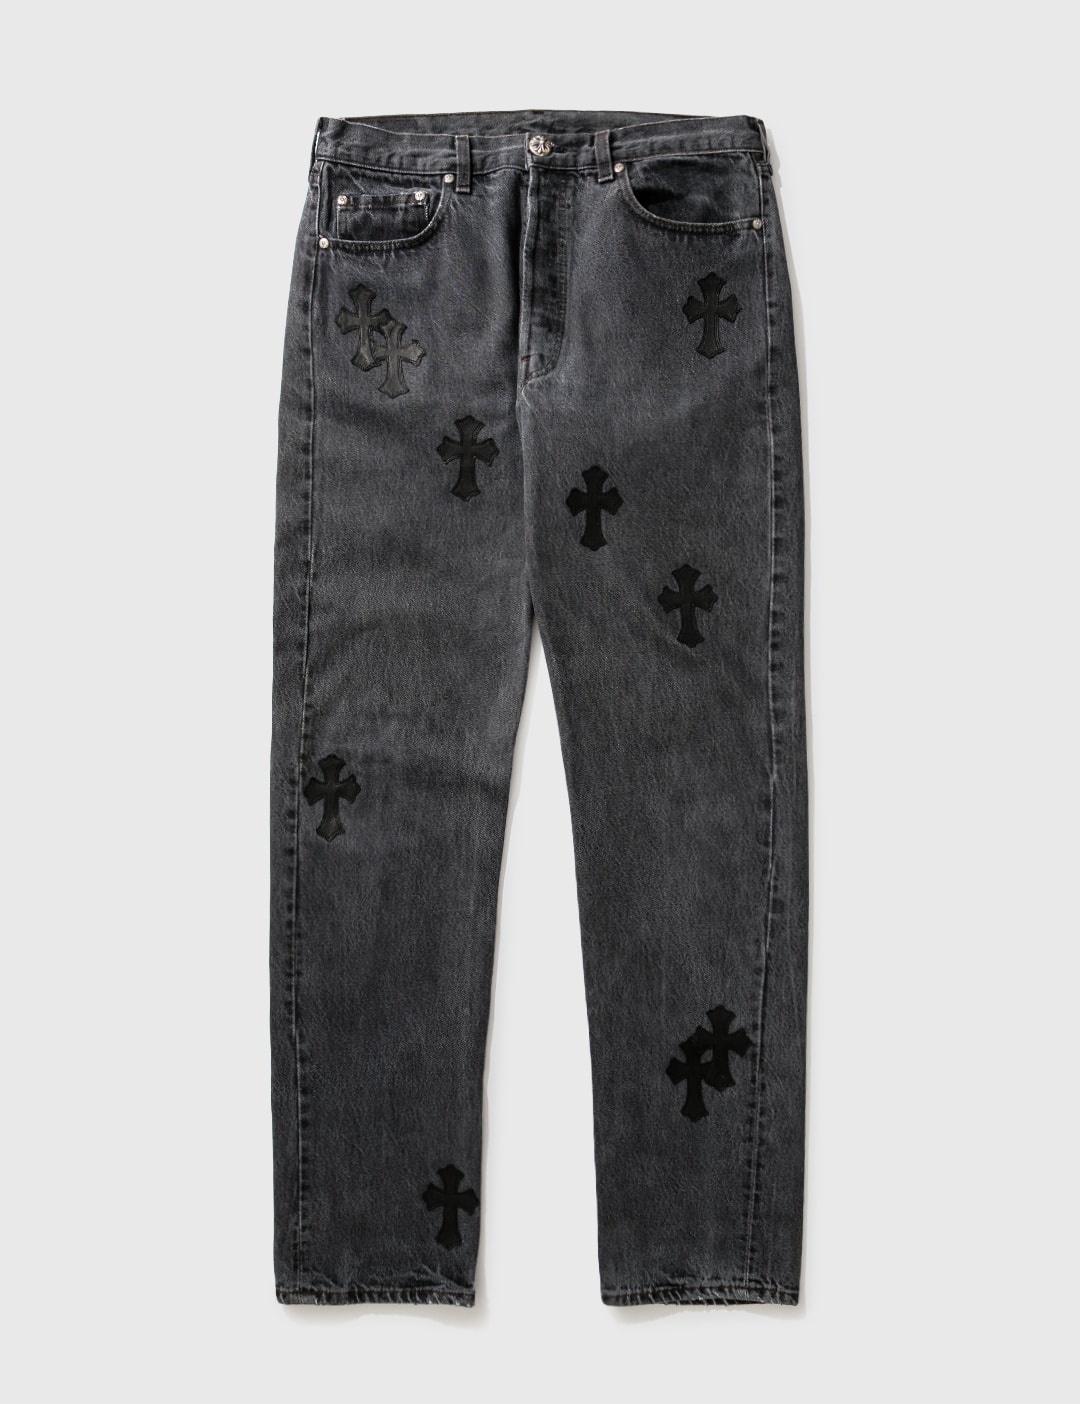 CHROME HEARTS - Chrome Hearts X Levis Black Jeans | HBX - Globally Curated  Fashion and Lifestyle by Hypebeast